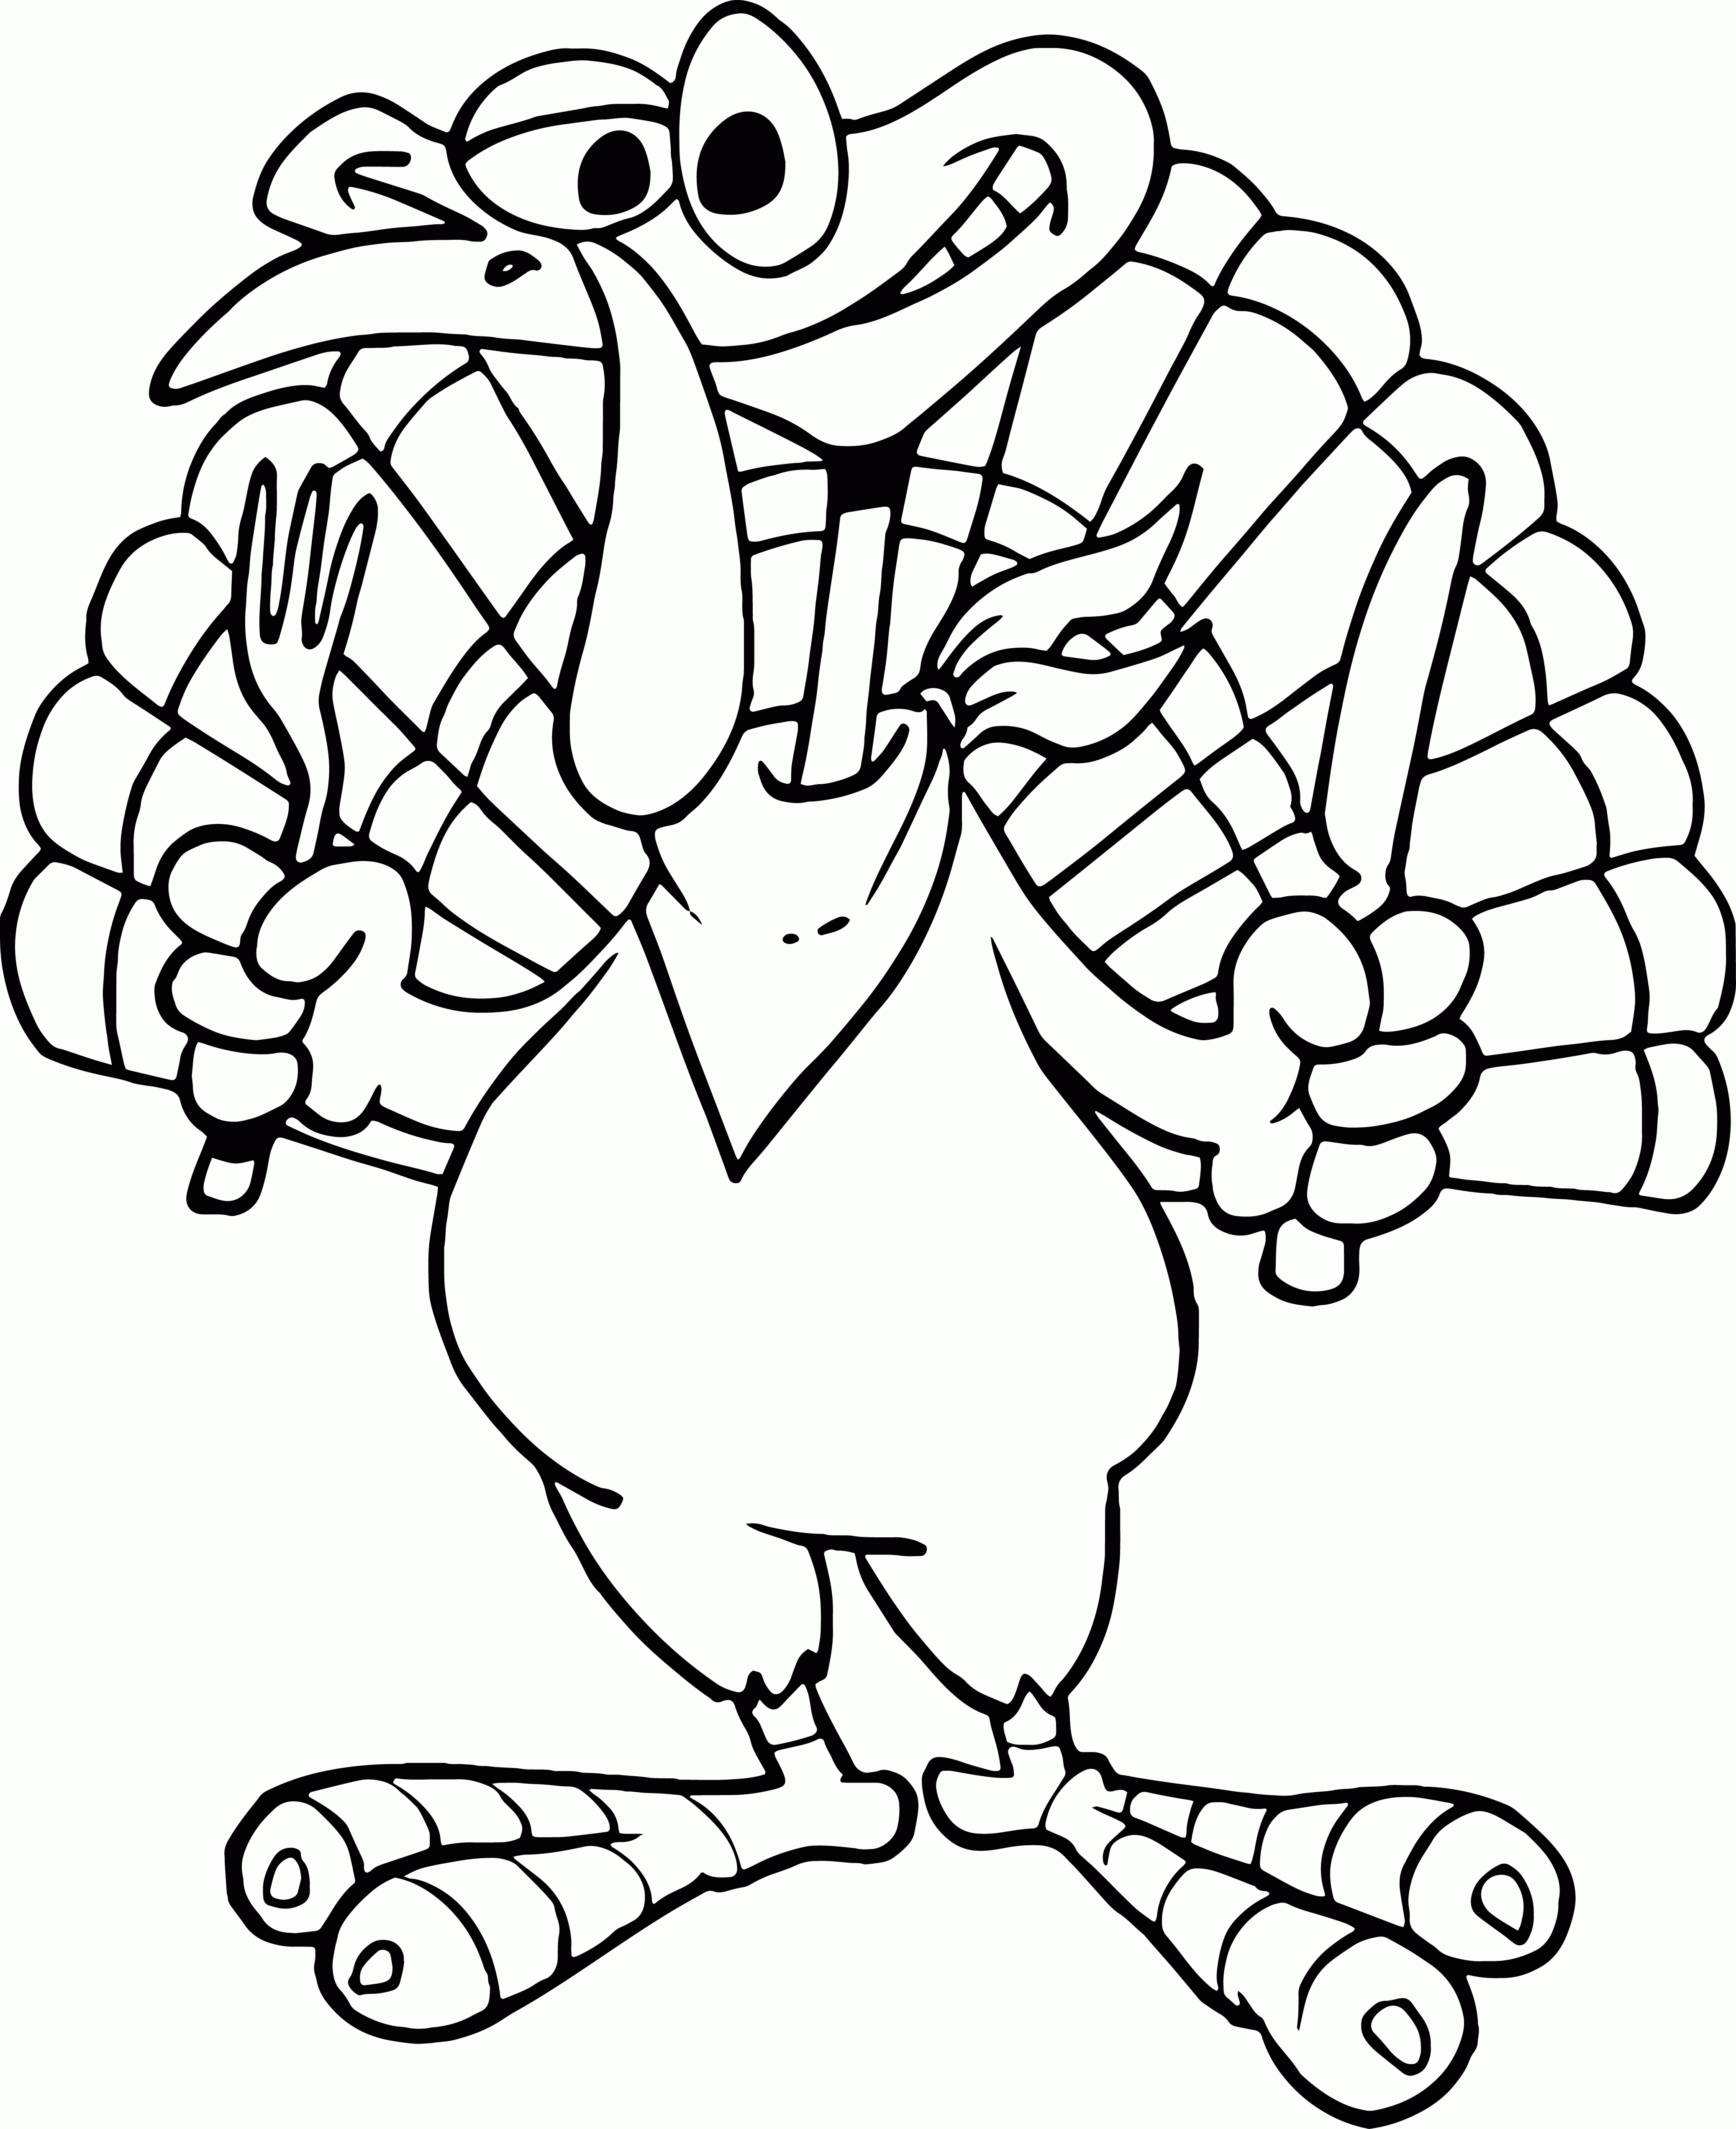 Turkey Cartoon Coloring Pages | Wecoloringpage